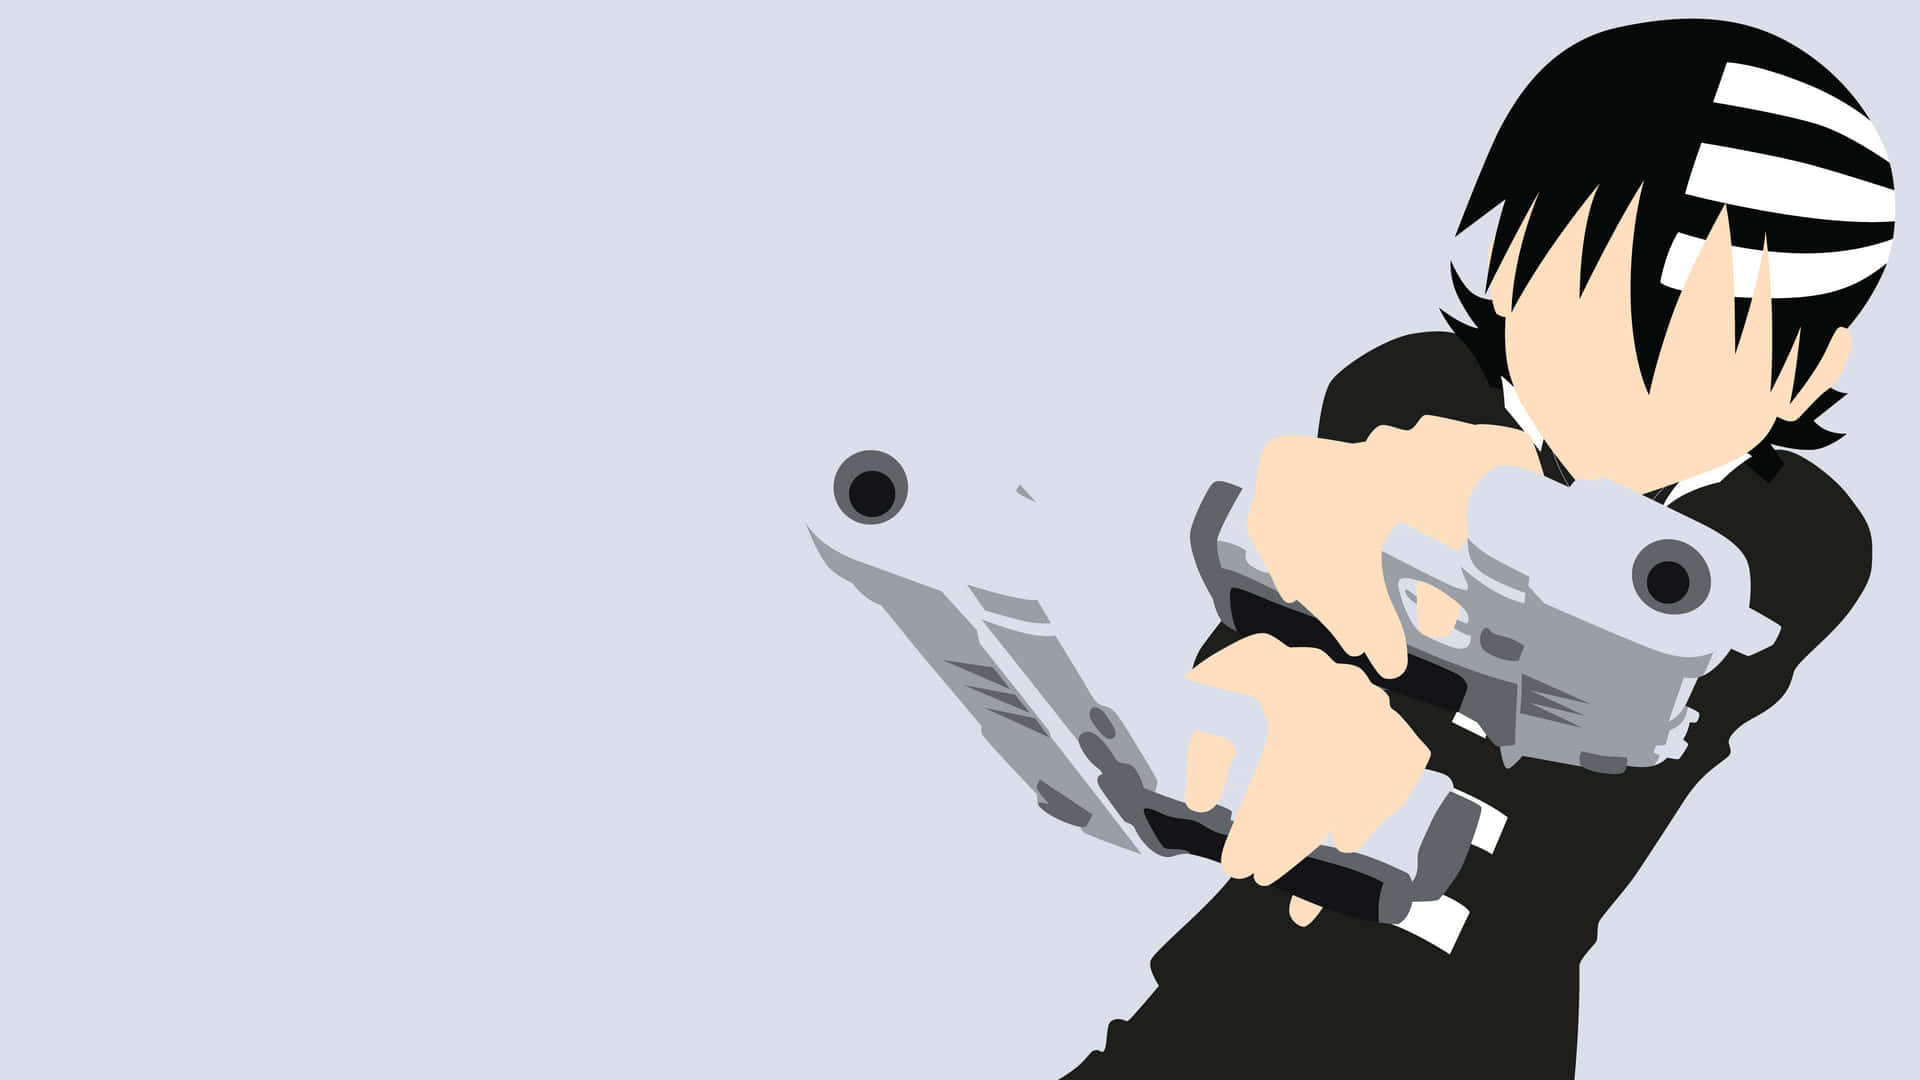 The highly creative and action-packed Soul Eater manga series! Wallpaper